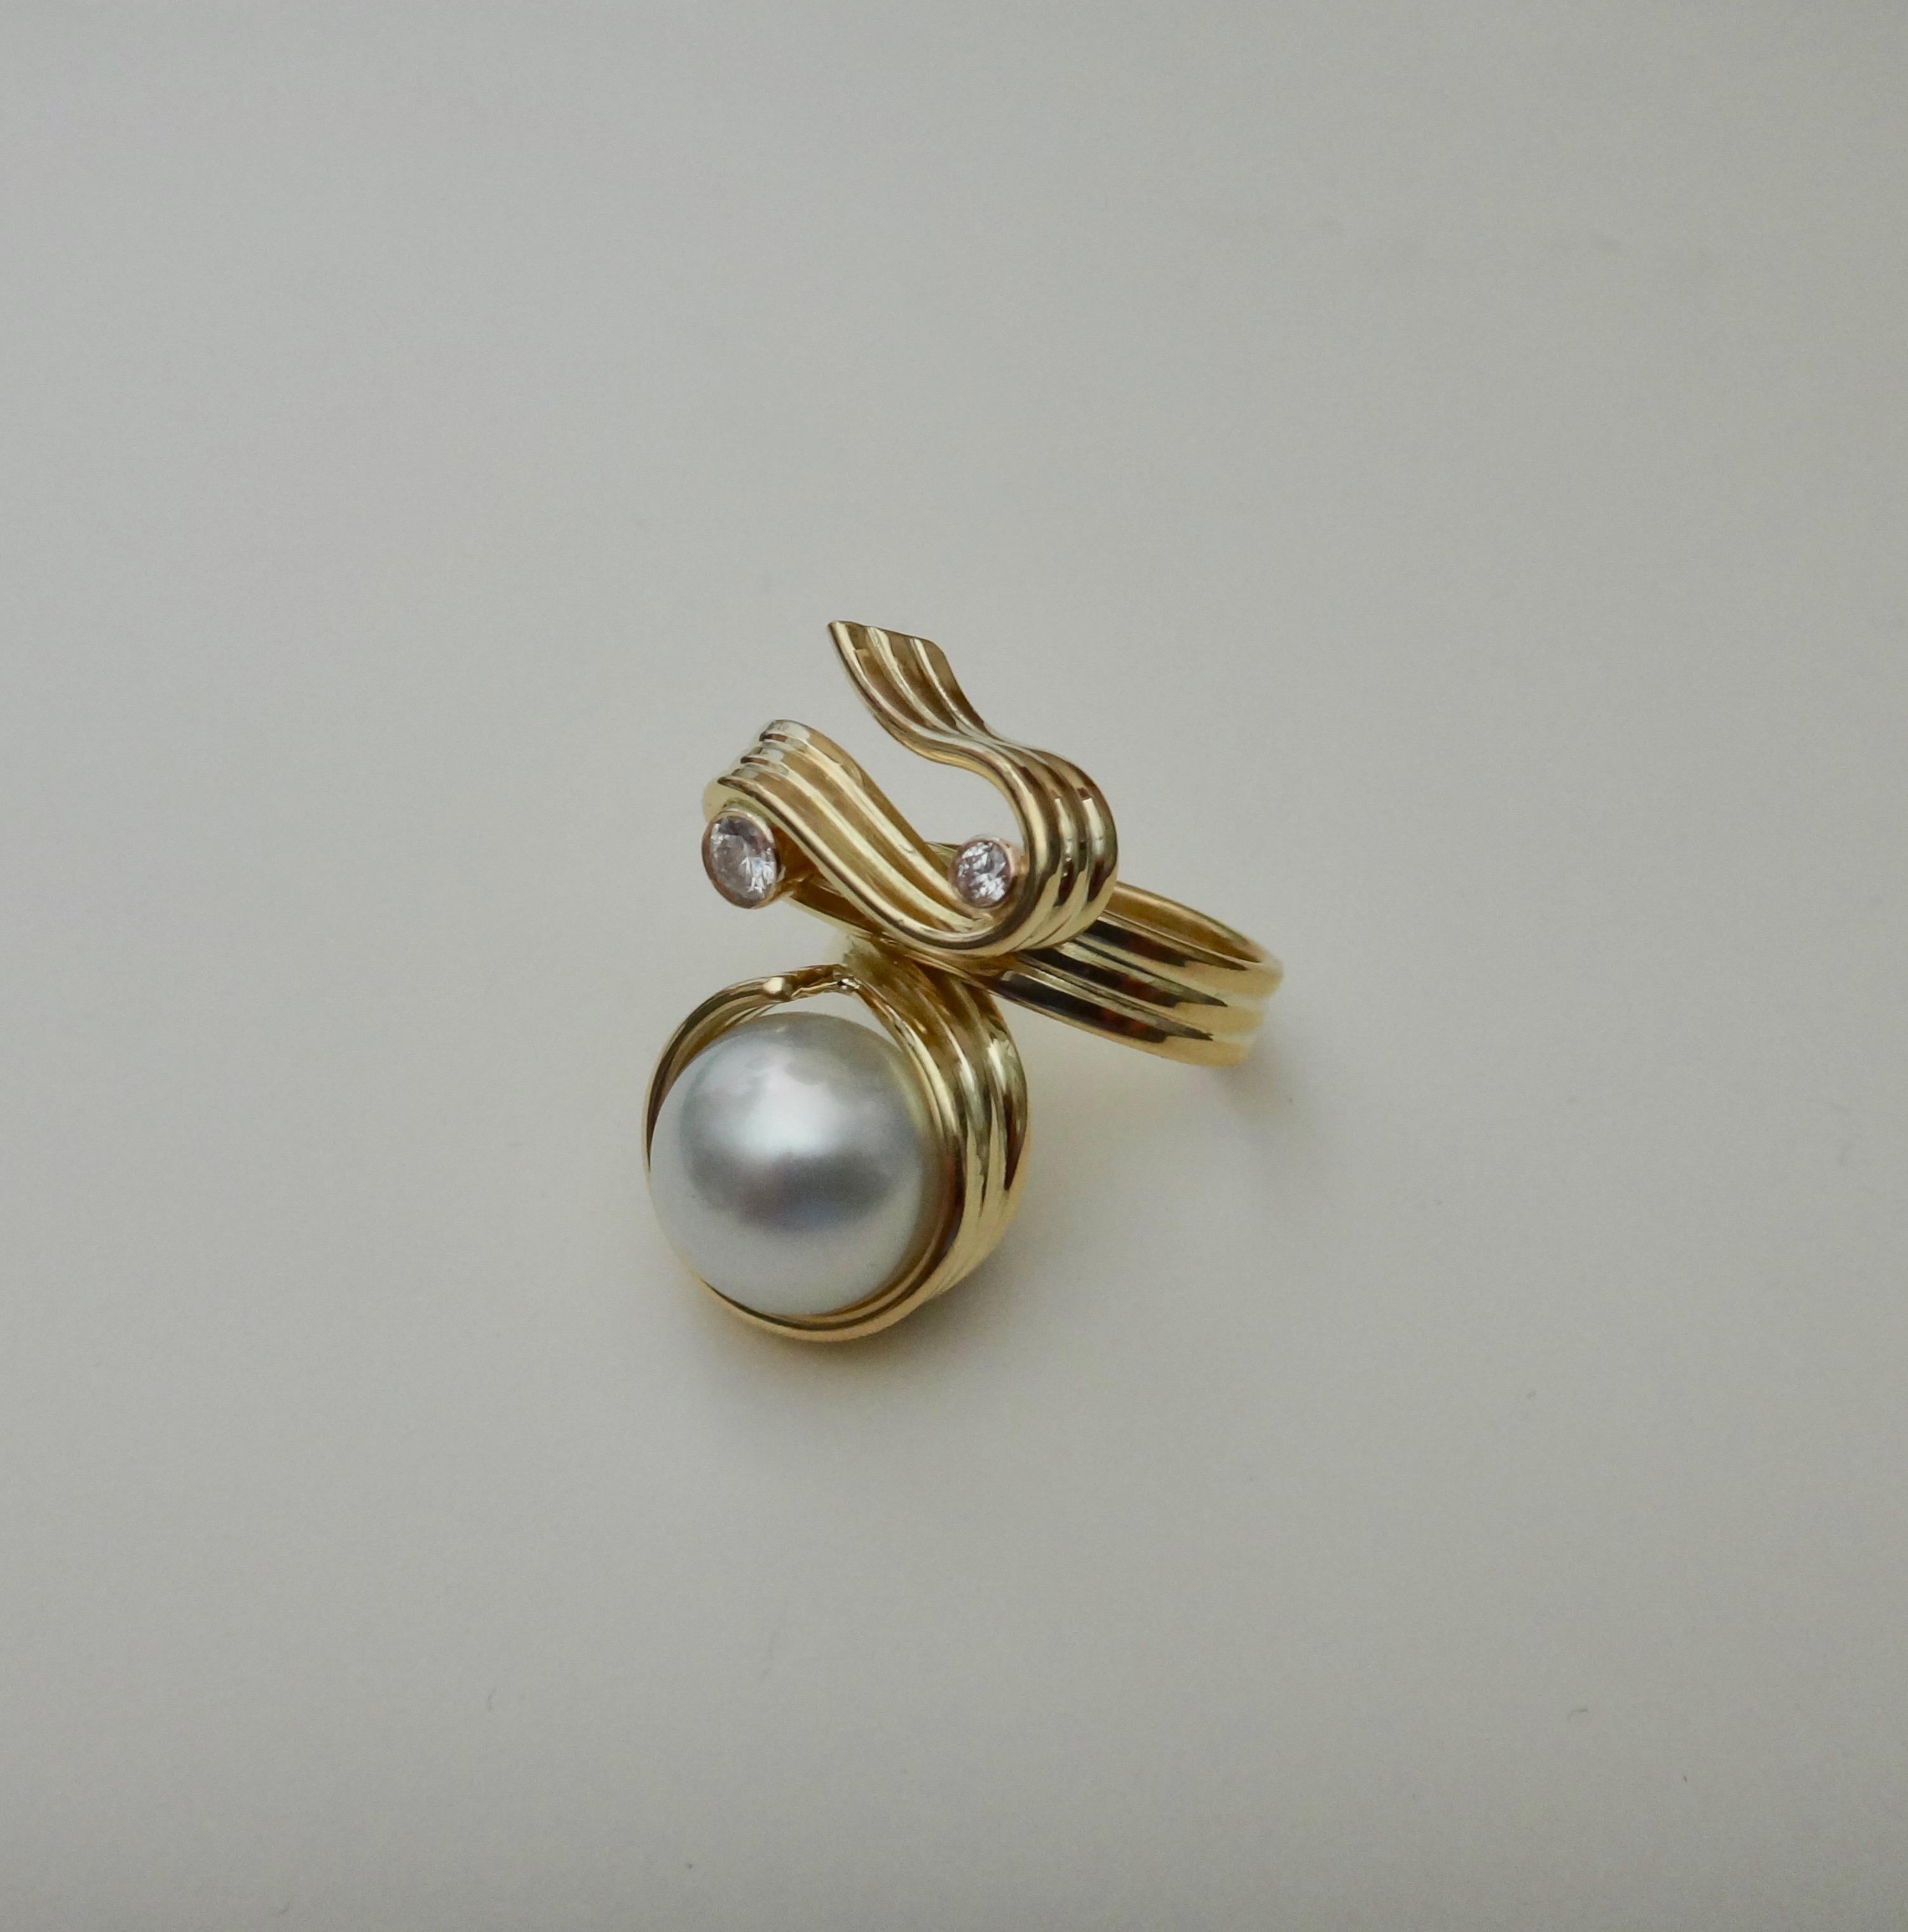 One continuous strip of 18k yellow gold wraps and twists around the finger in this Ribbon Candy ring.  Within the twists and turns is set a 12.5mm, White, gem quality  Paspaley South Seas pearl.  Further decorating the ring are two bezel set white